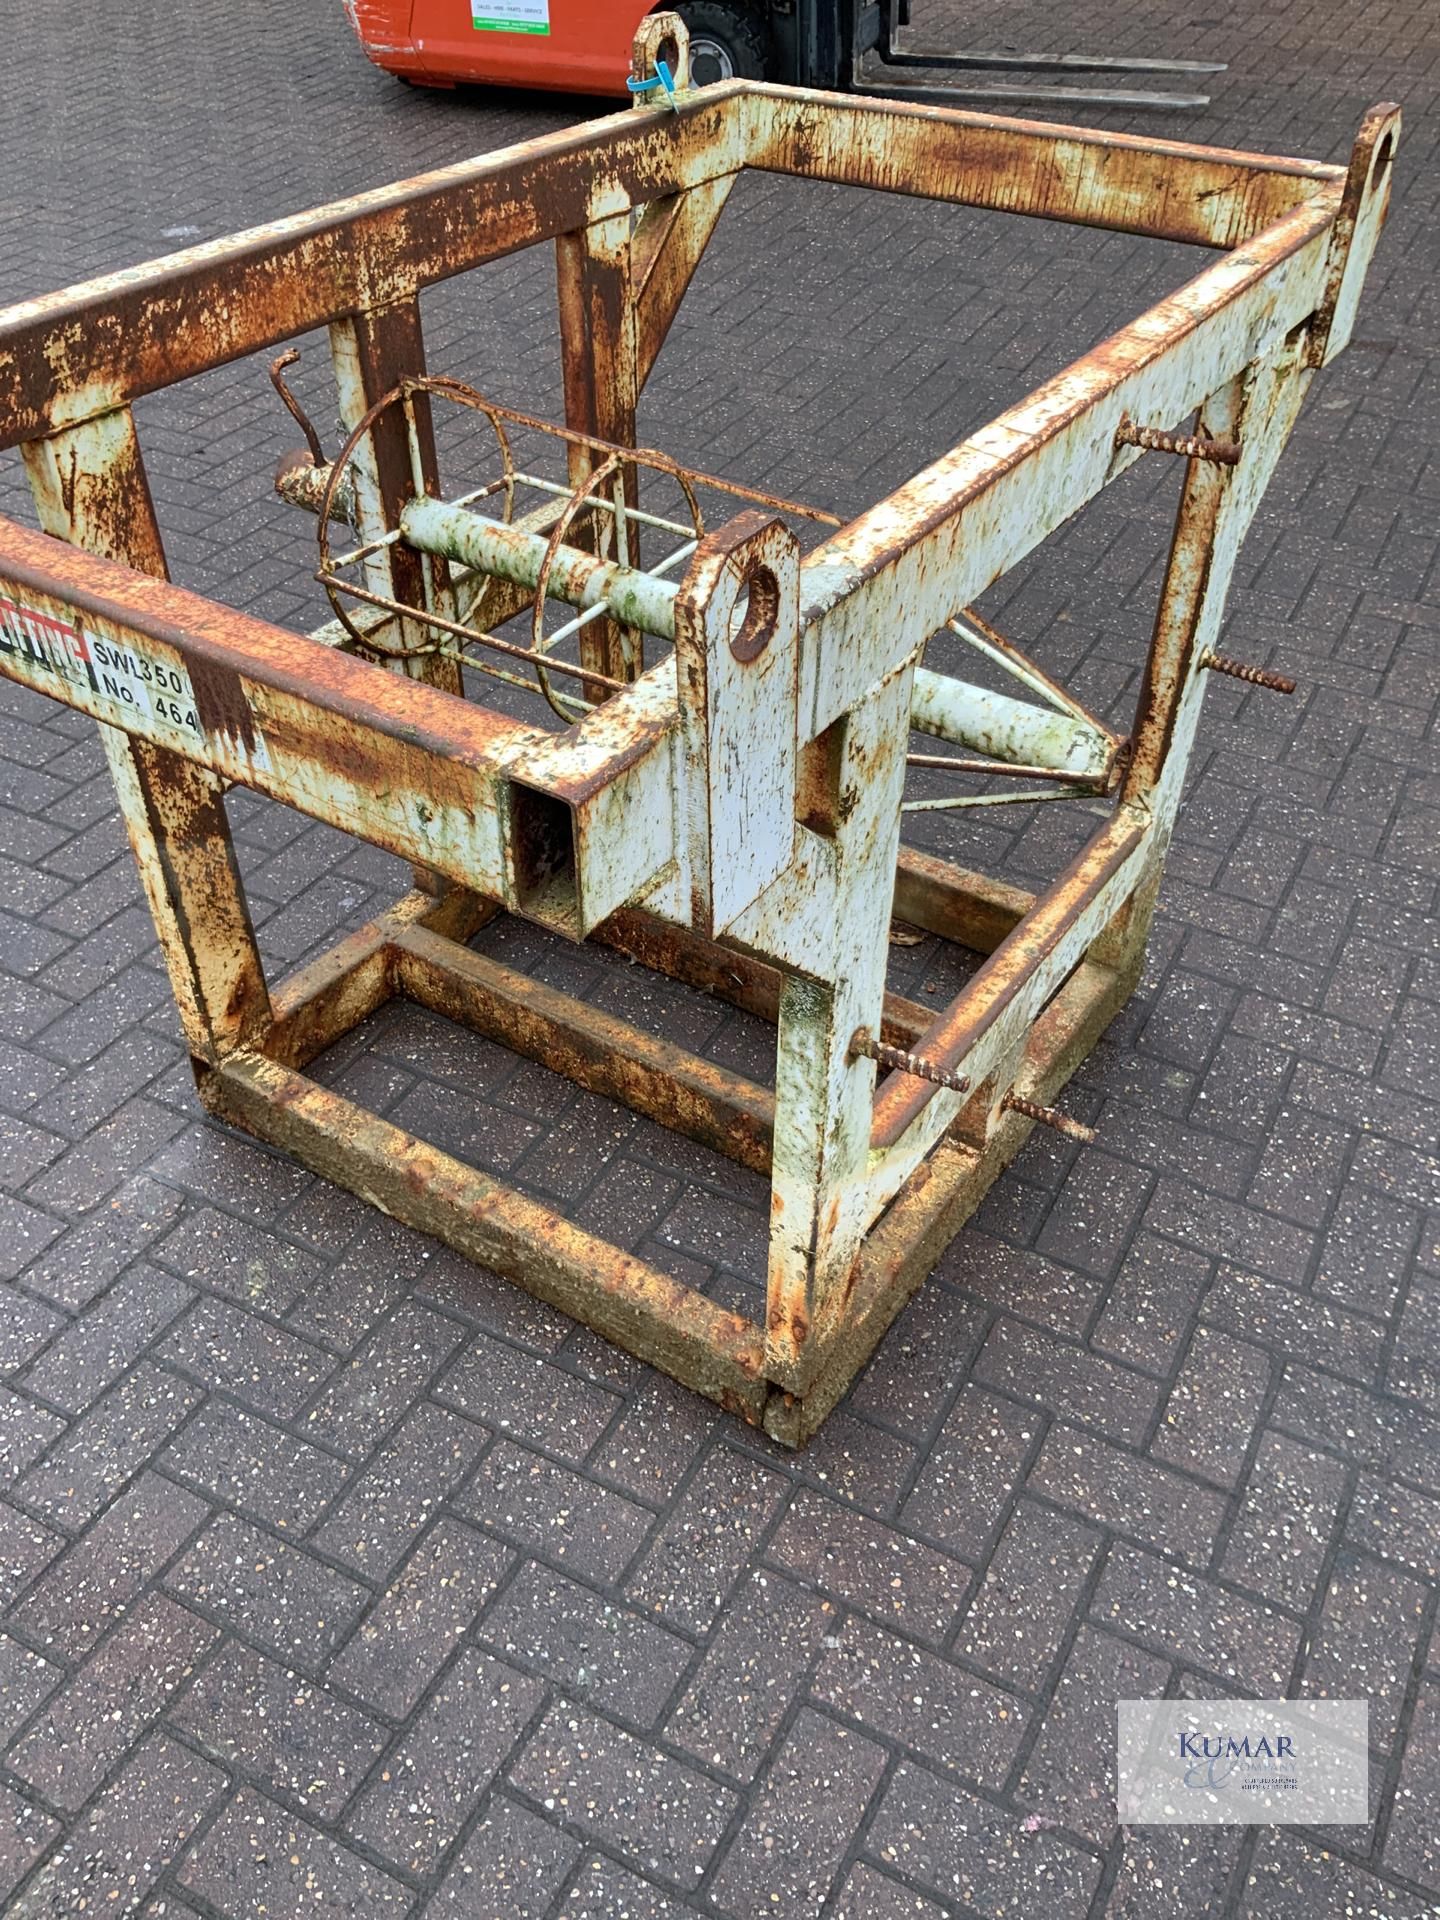 wire reel lifting frame - Image 4 of 4